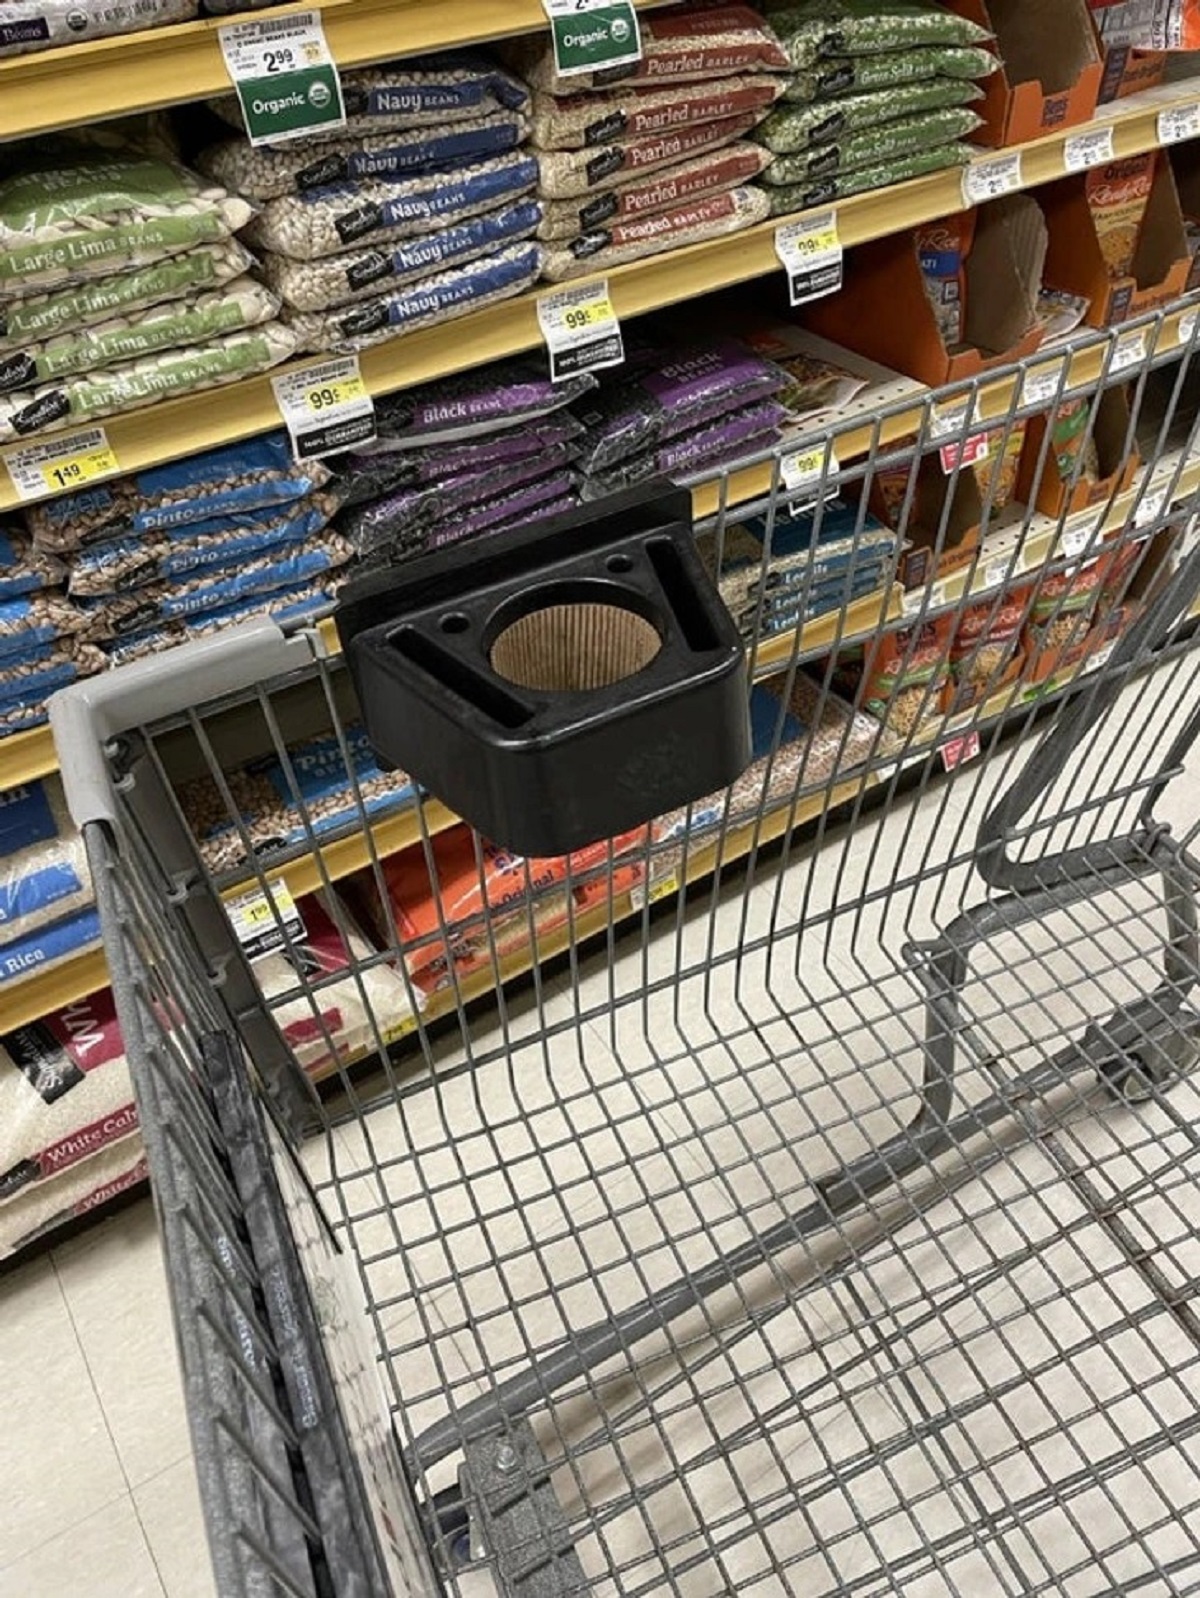 This grocery cart has a drink holder to hold coffee cups while you shop.